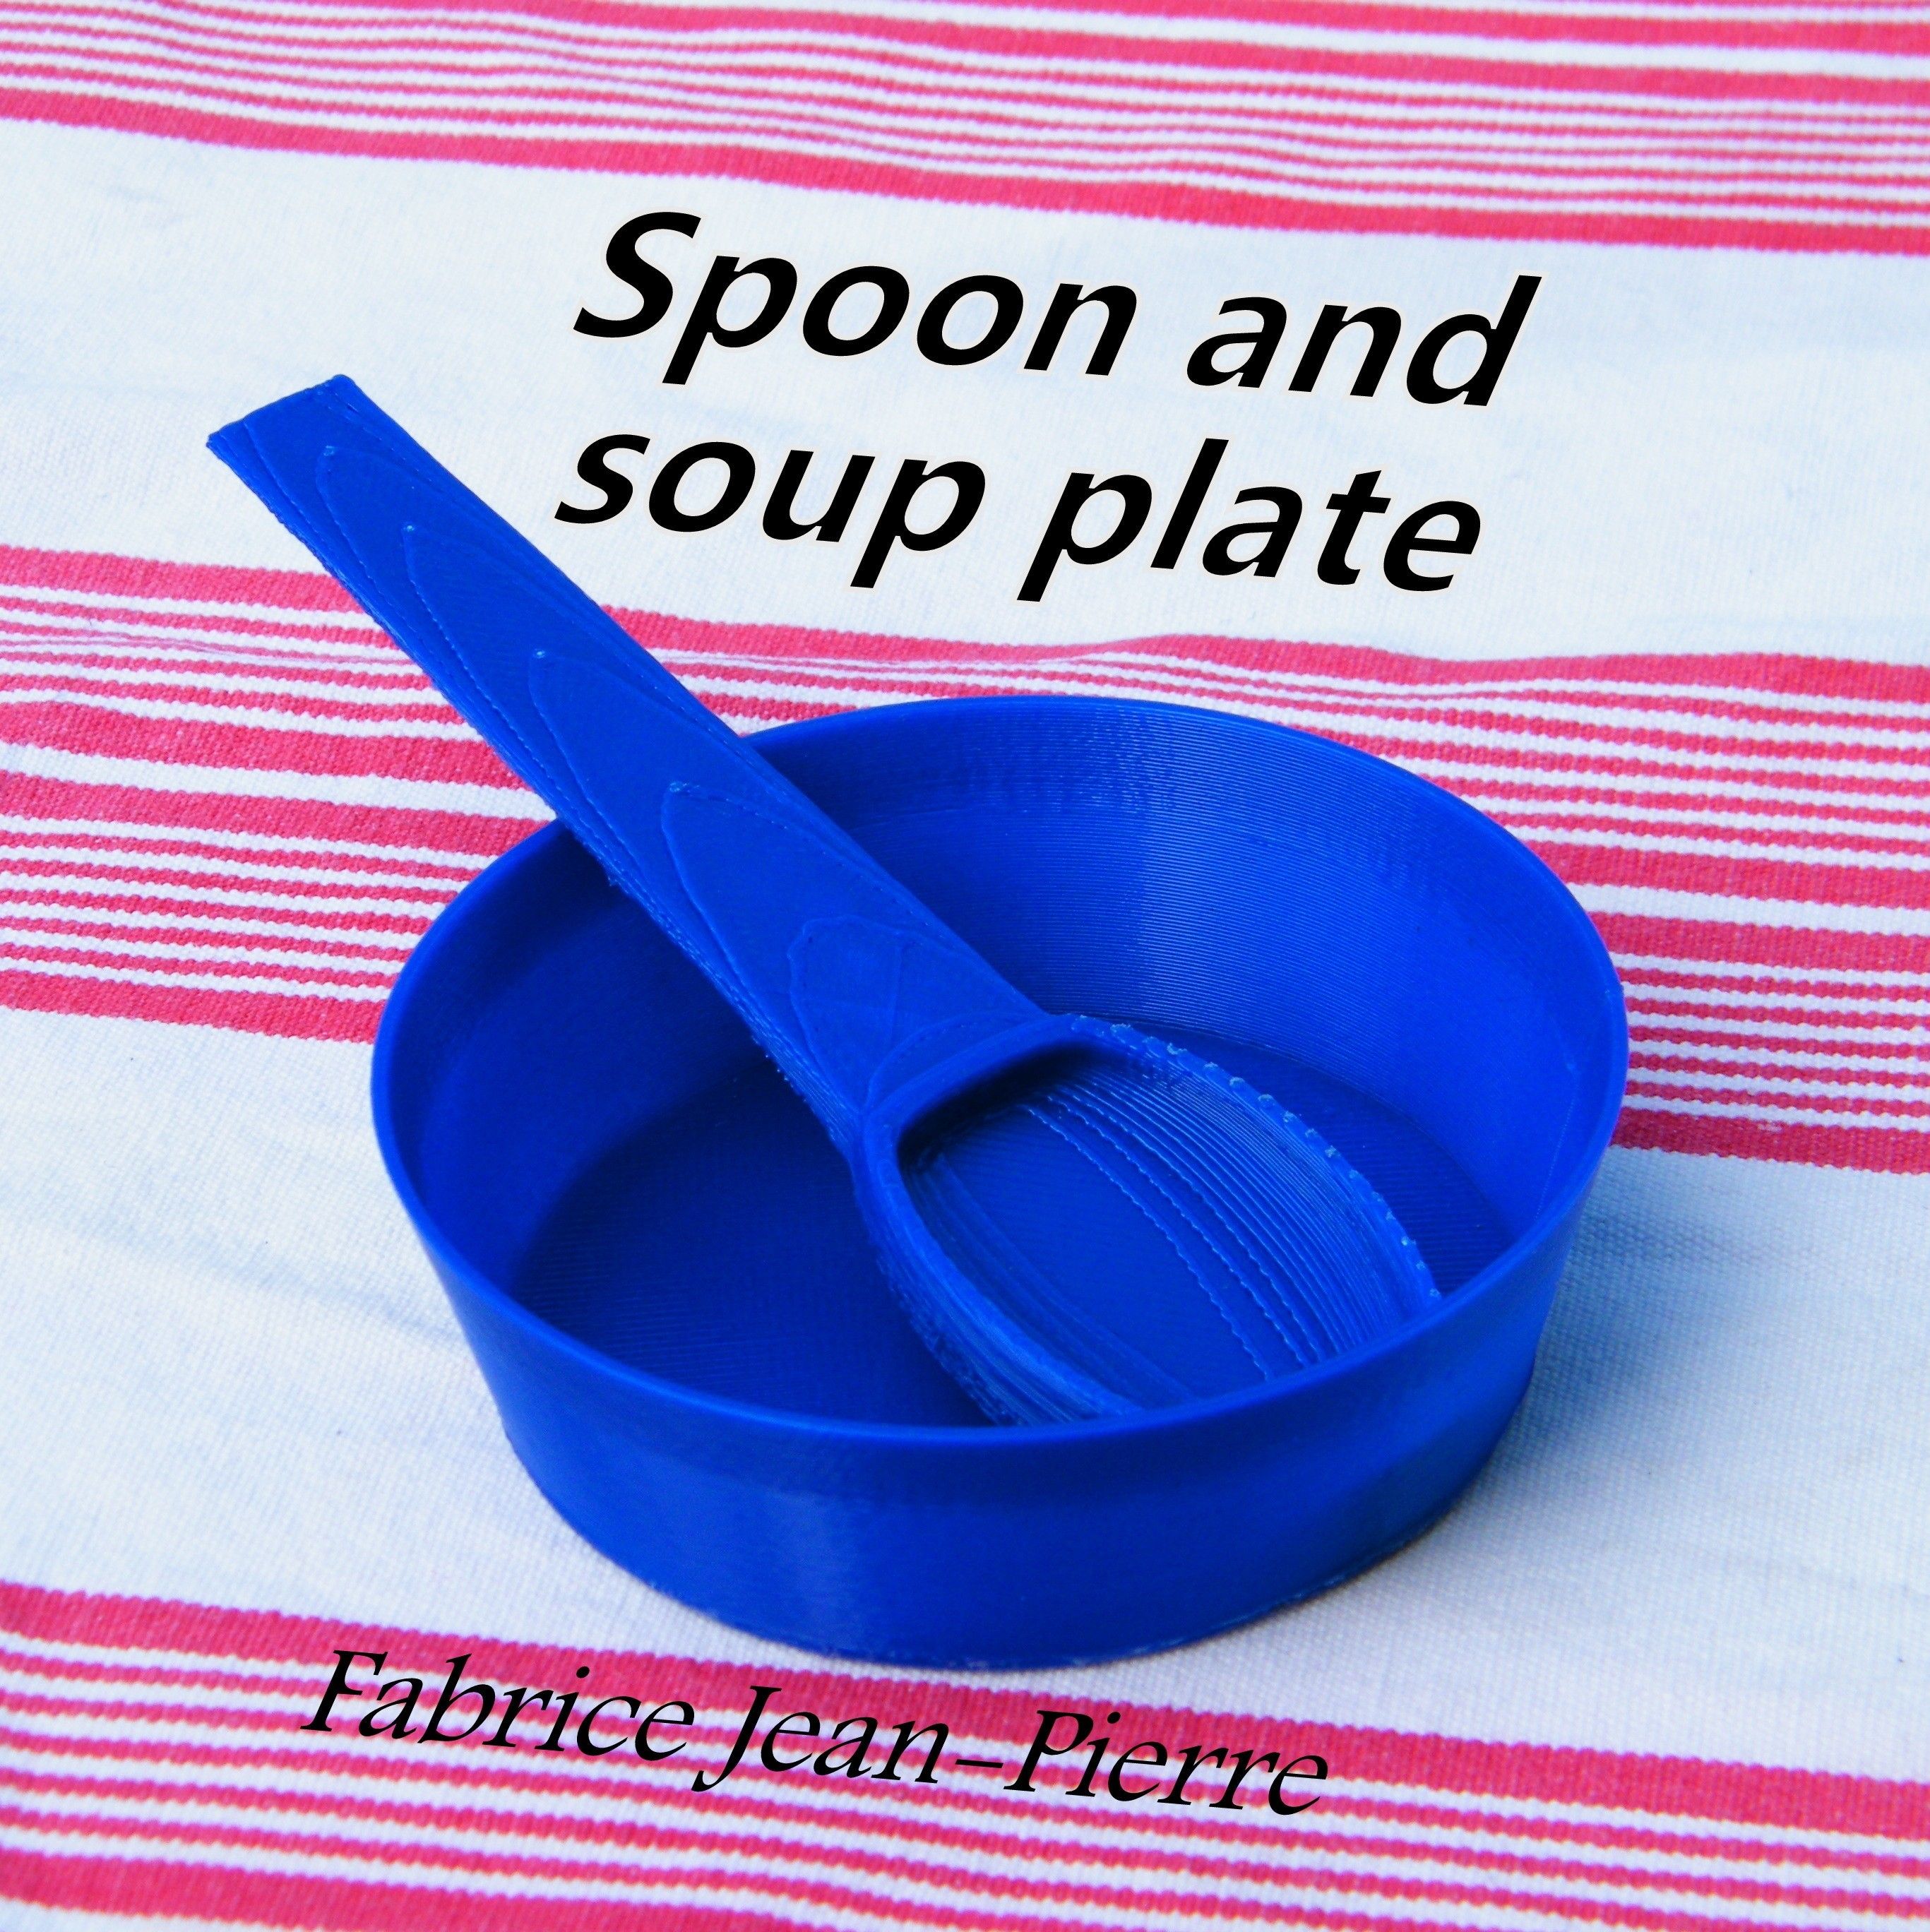 Spoon_soup_plate_title_carre.jpg Download STL file Spoon and soup plate • 3D printable design, 3d-fabric-jean-pierre